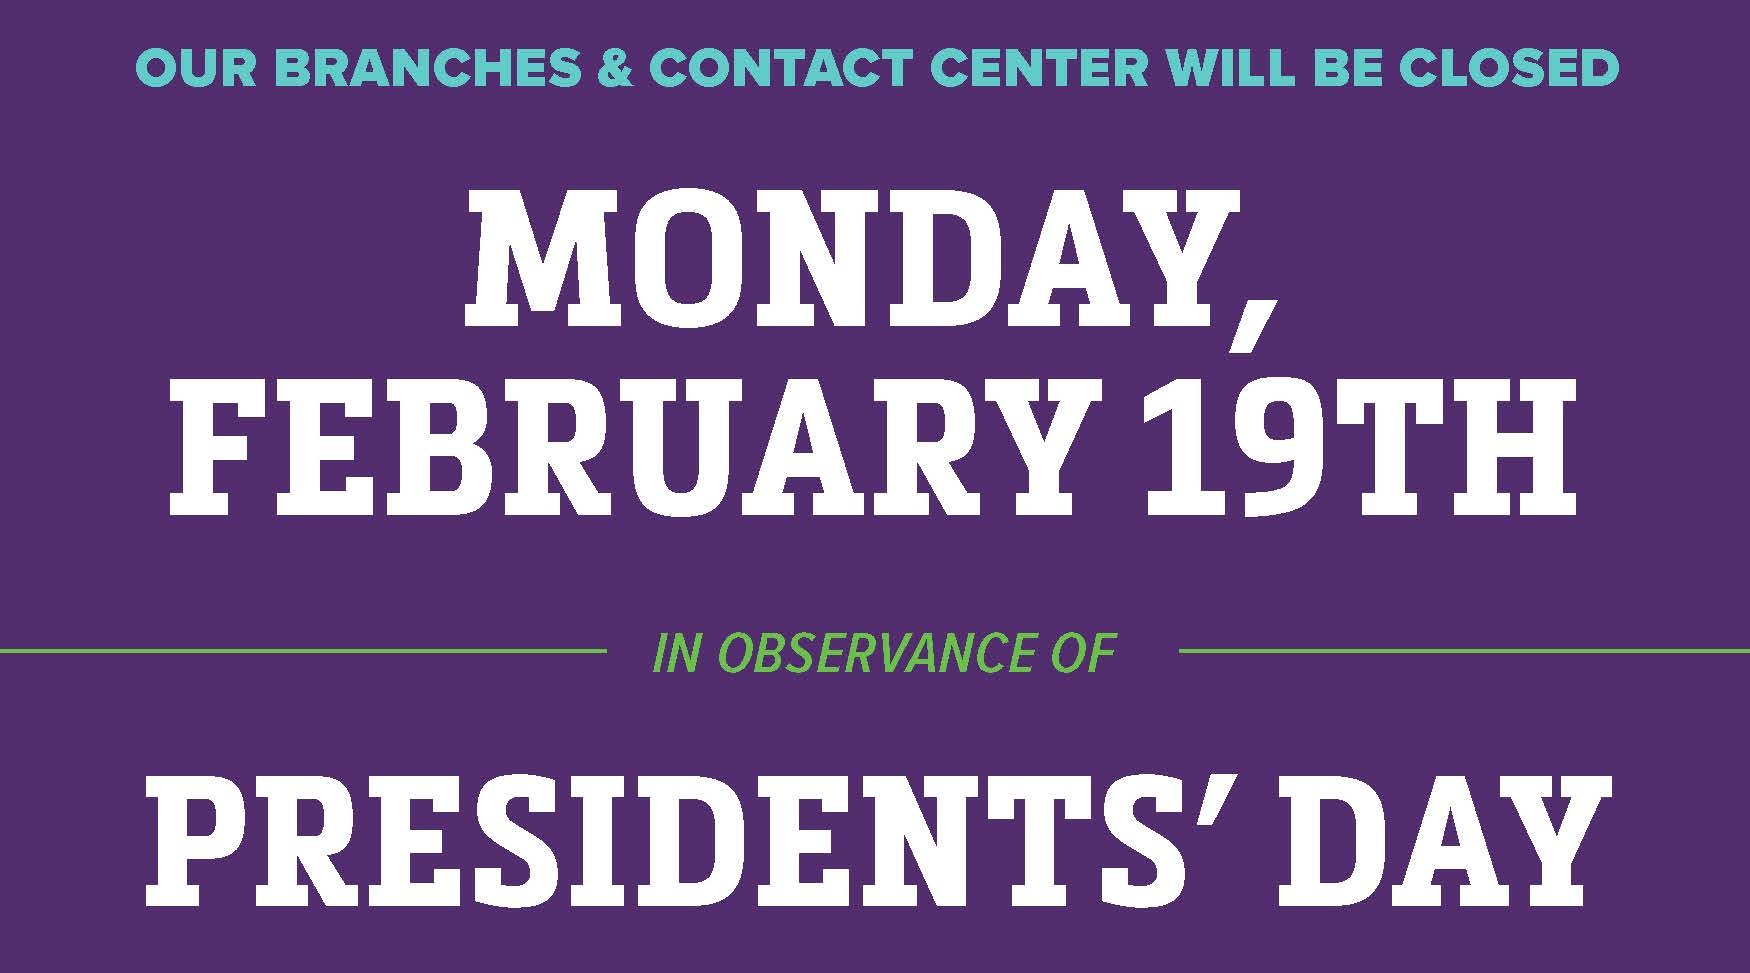 All Branches Closed on Monday, February 19th in Observance of Presidents' Day